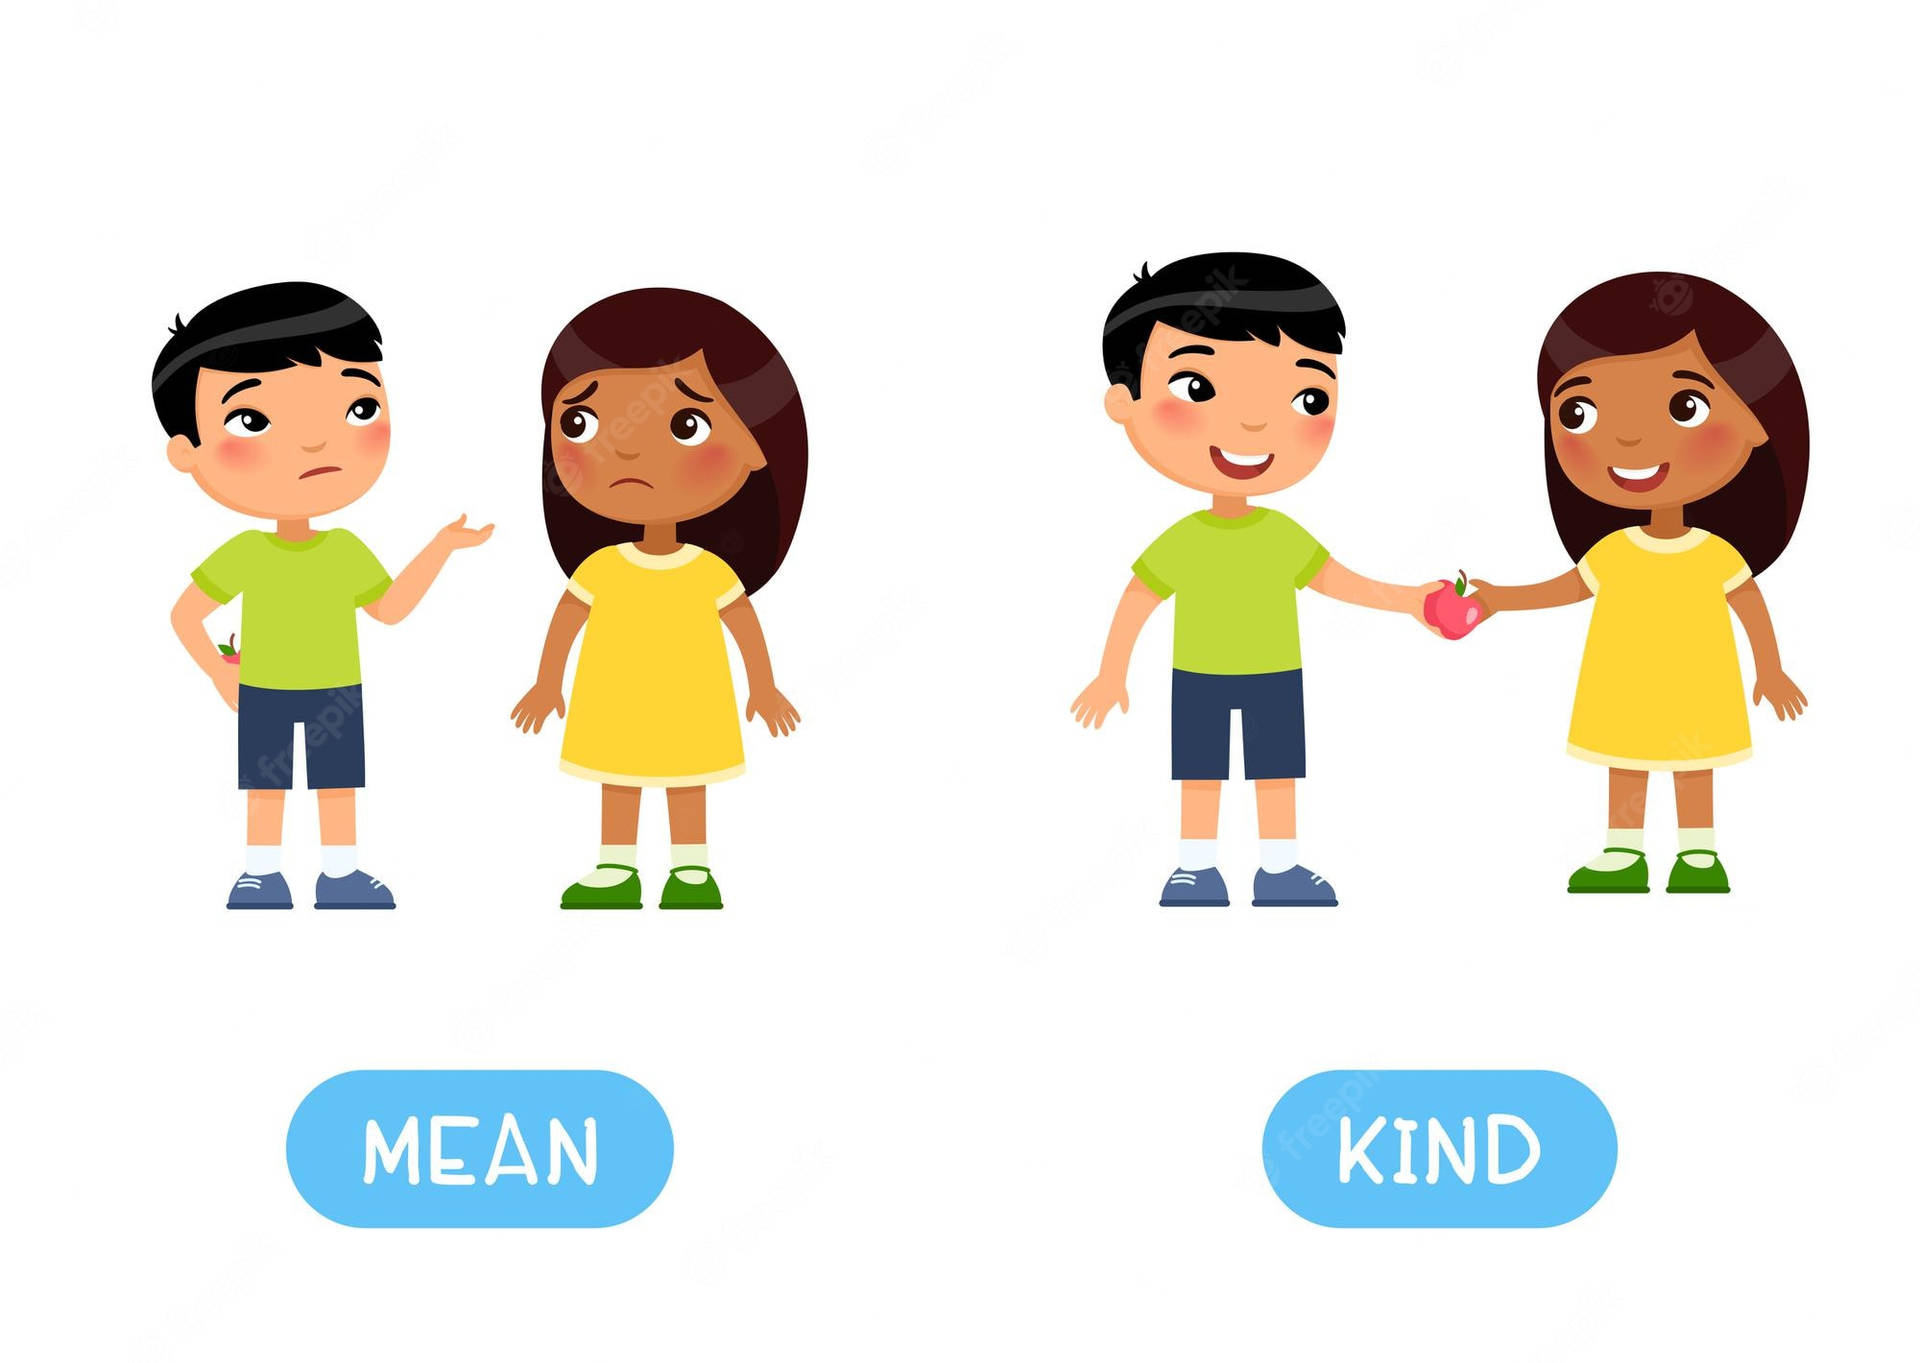 Contrasting Illustration Of Being Mean Vs Being Kind